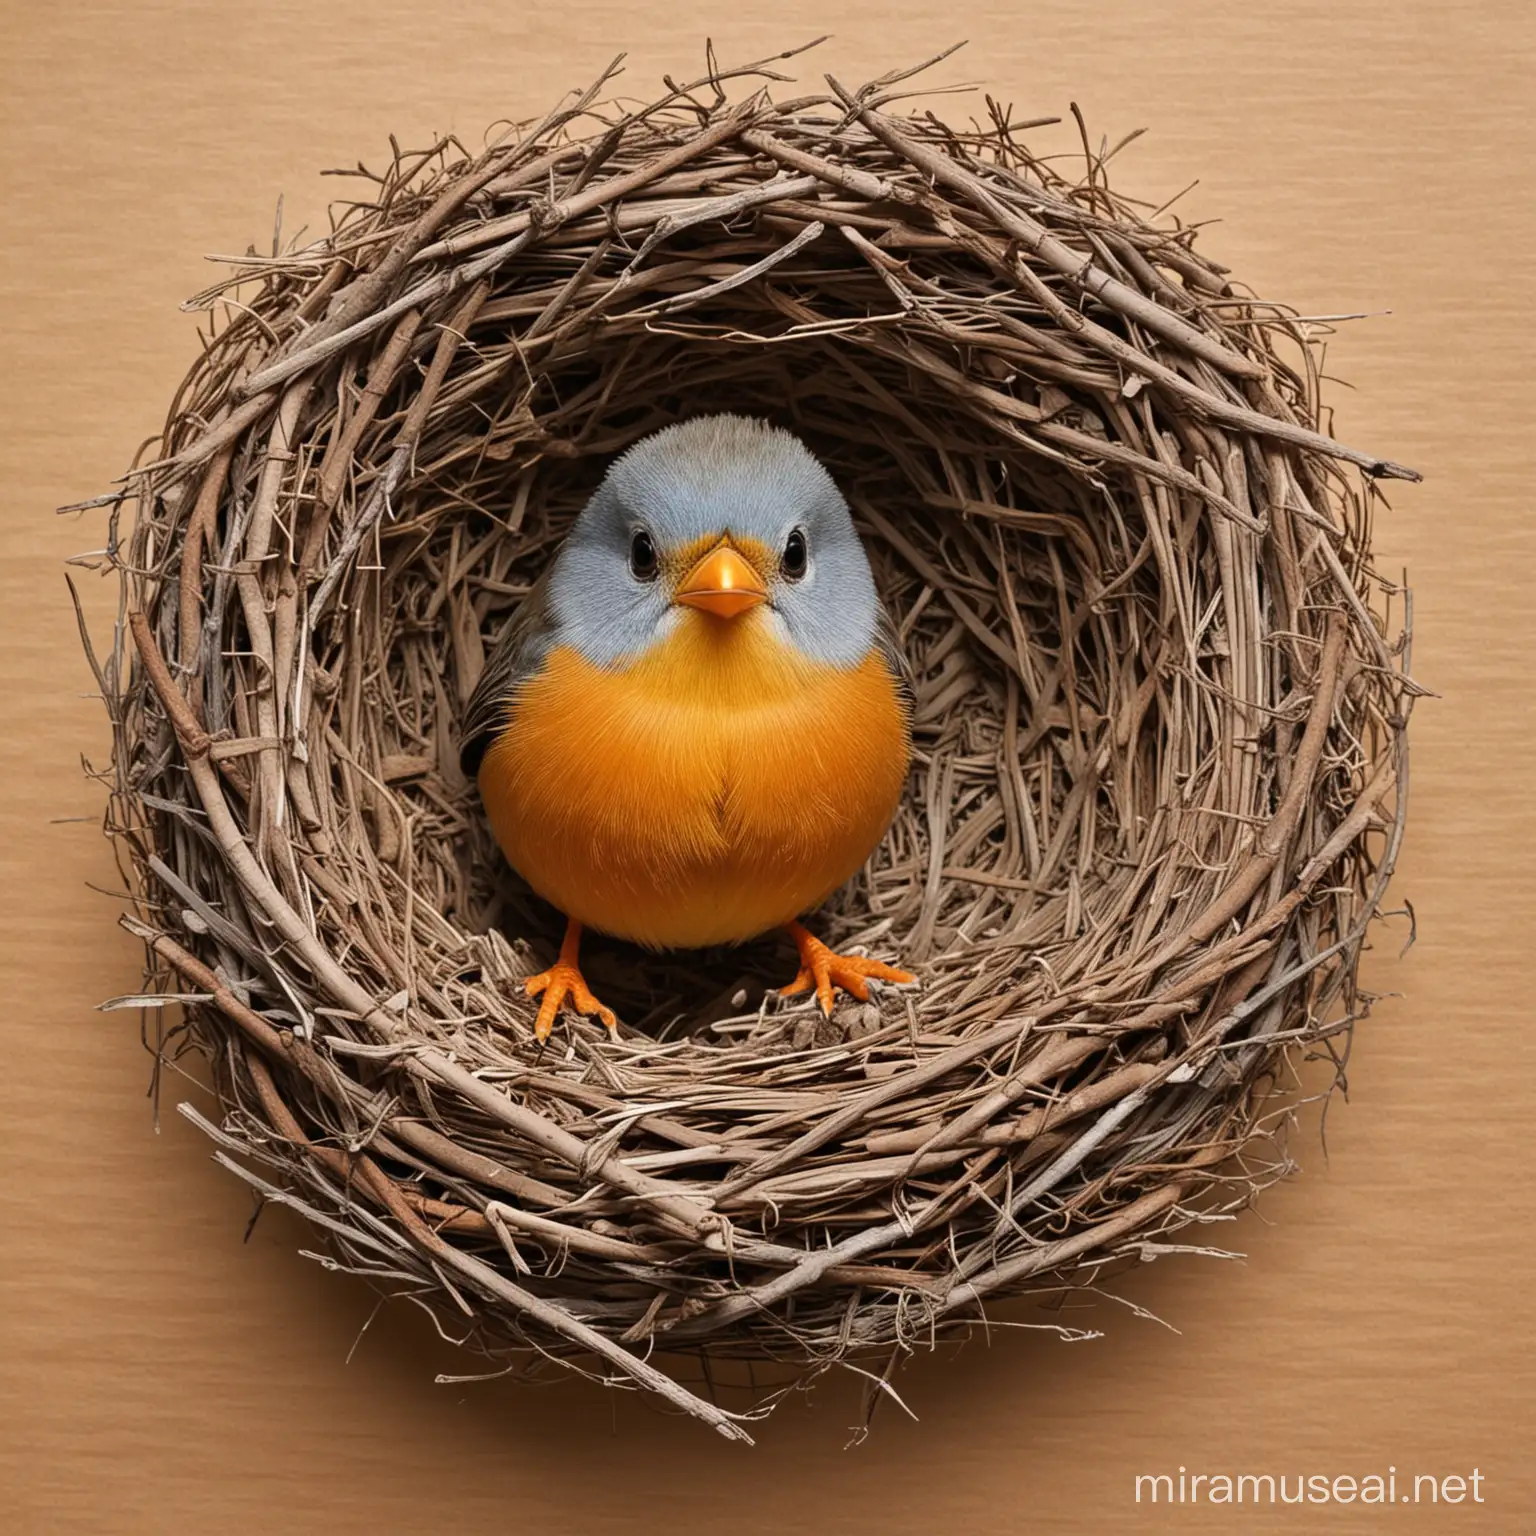 Draw a little bird that little by little build a big nest. Make a 2d picture as you would make for kids' book